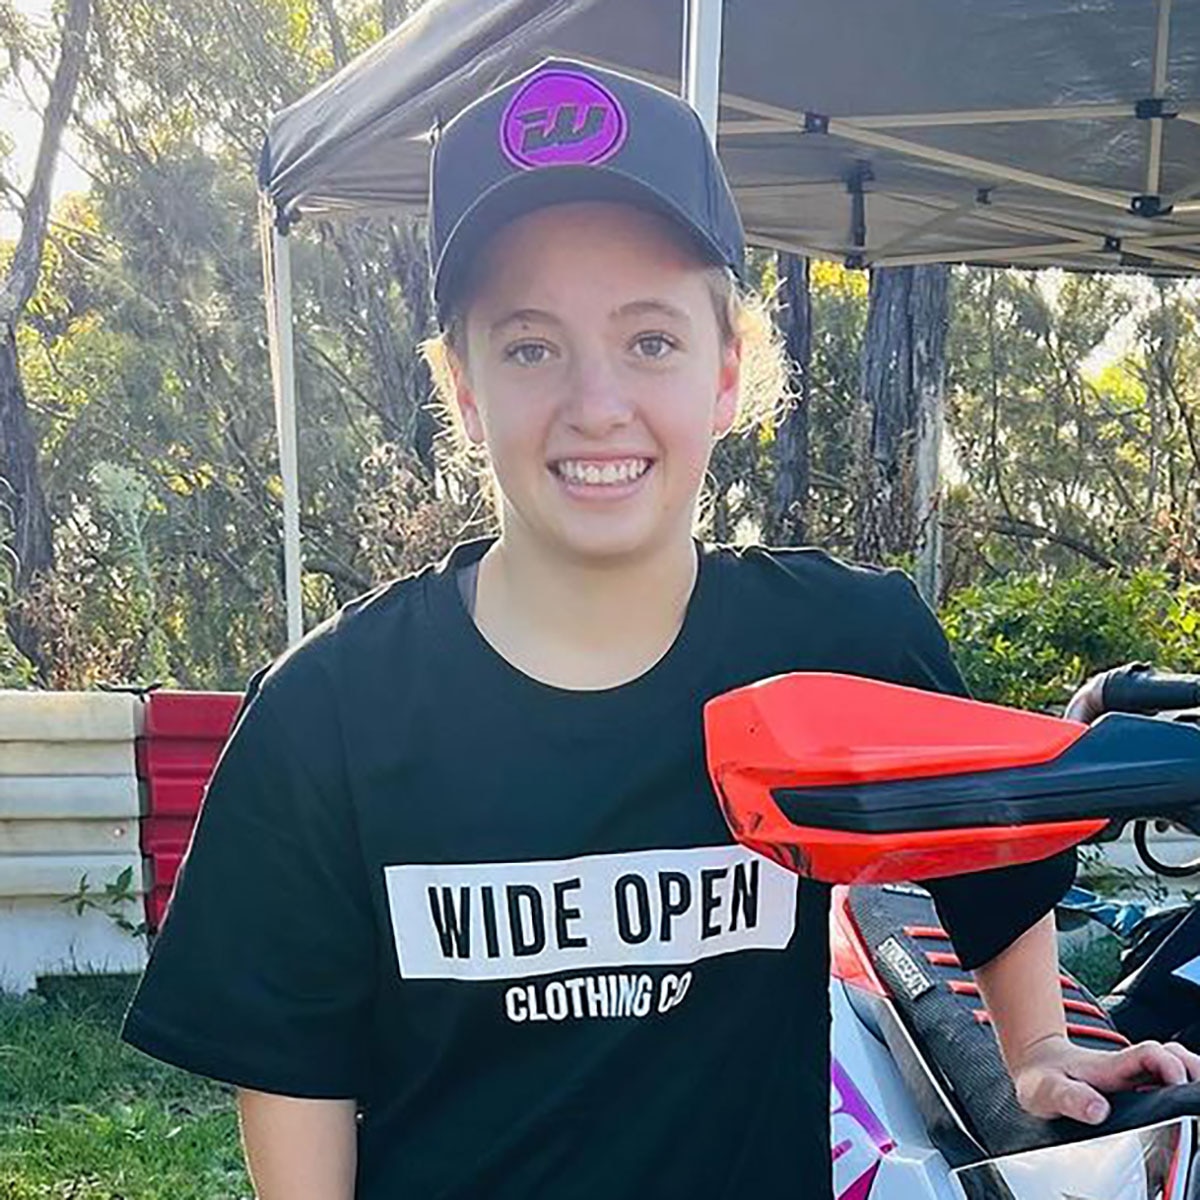 15-Year-Old Dirt Bike Rider Amelia Kotze Dead After Mid-Race Accident